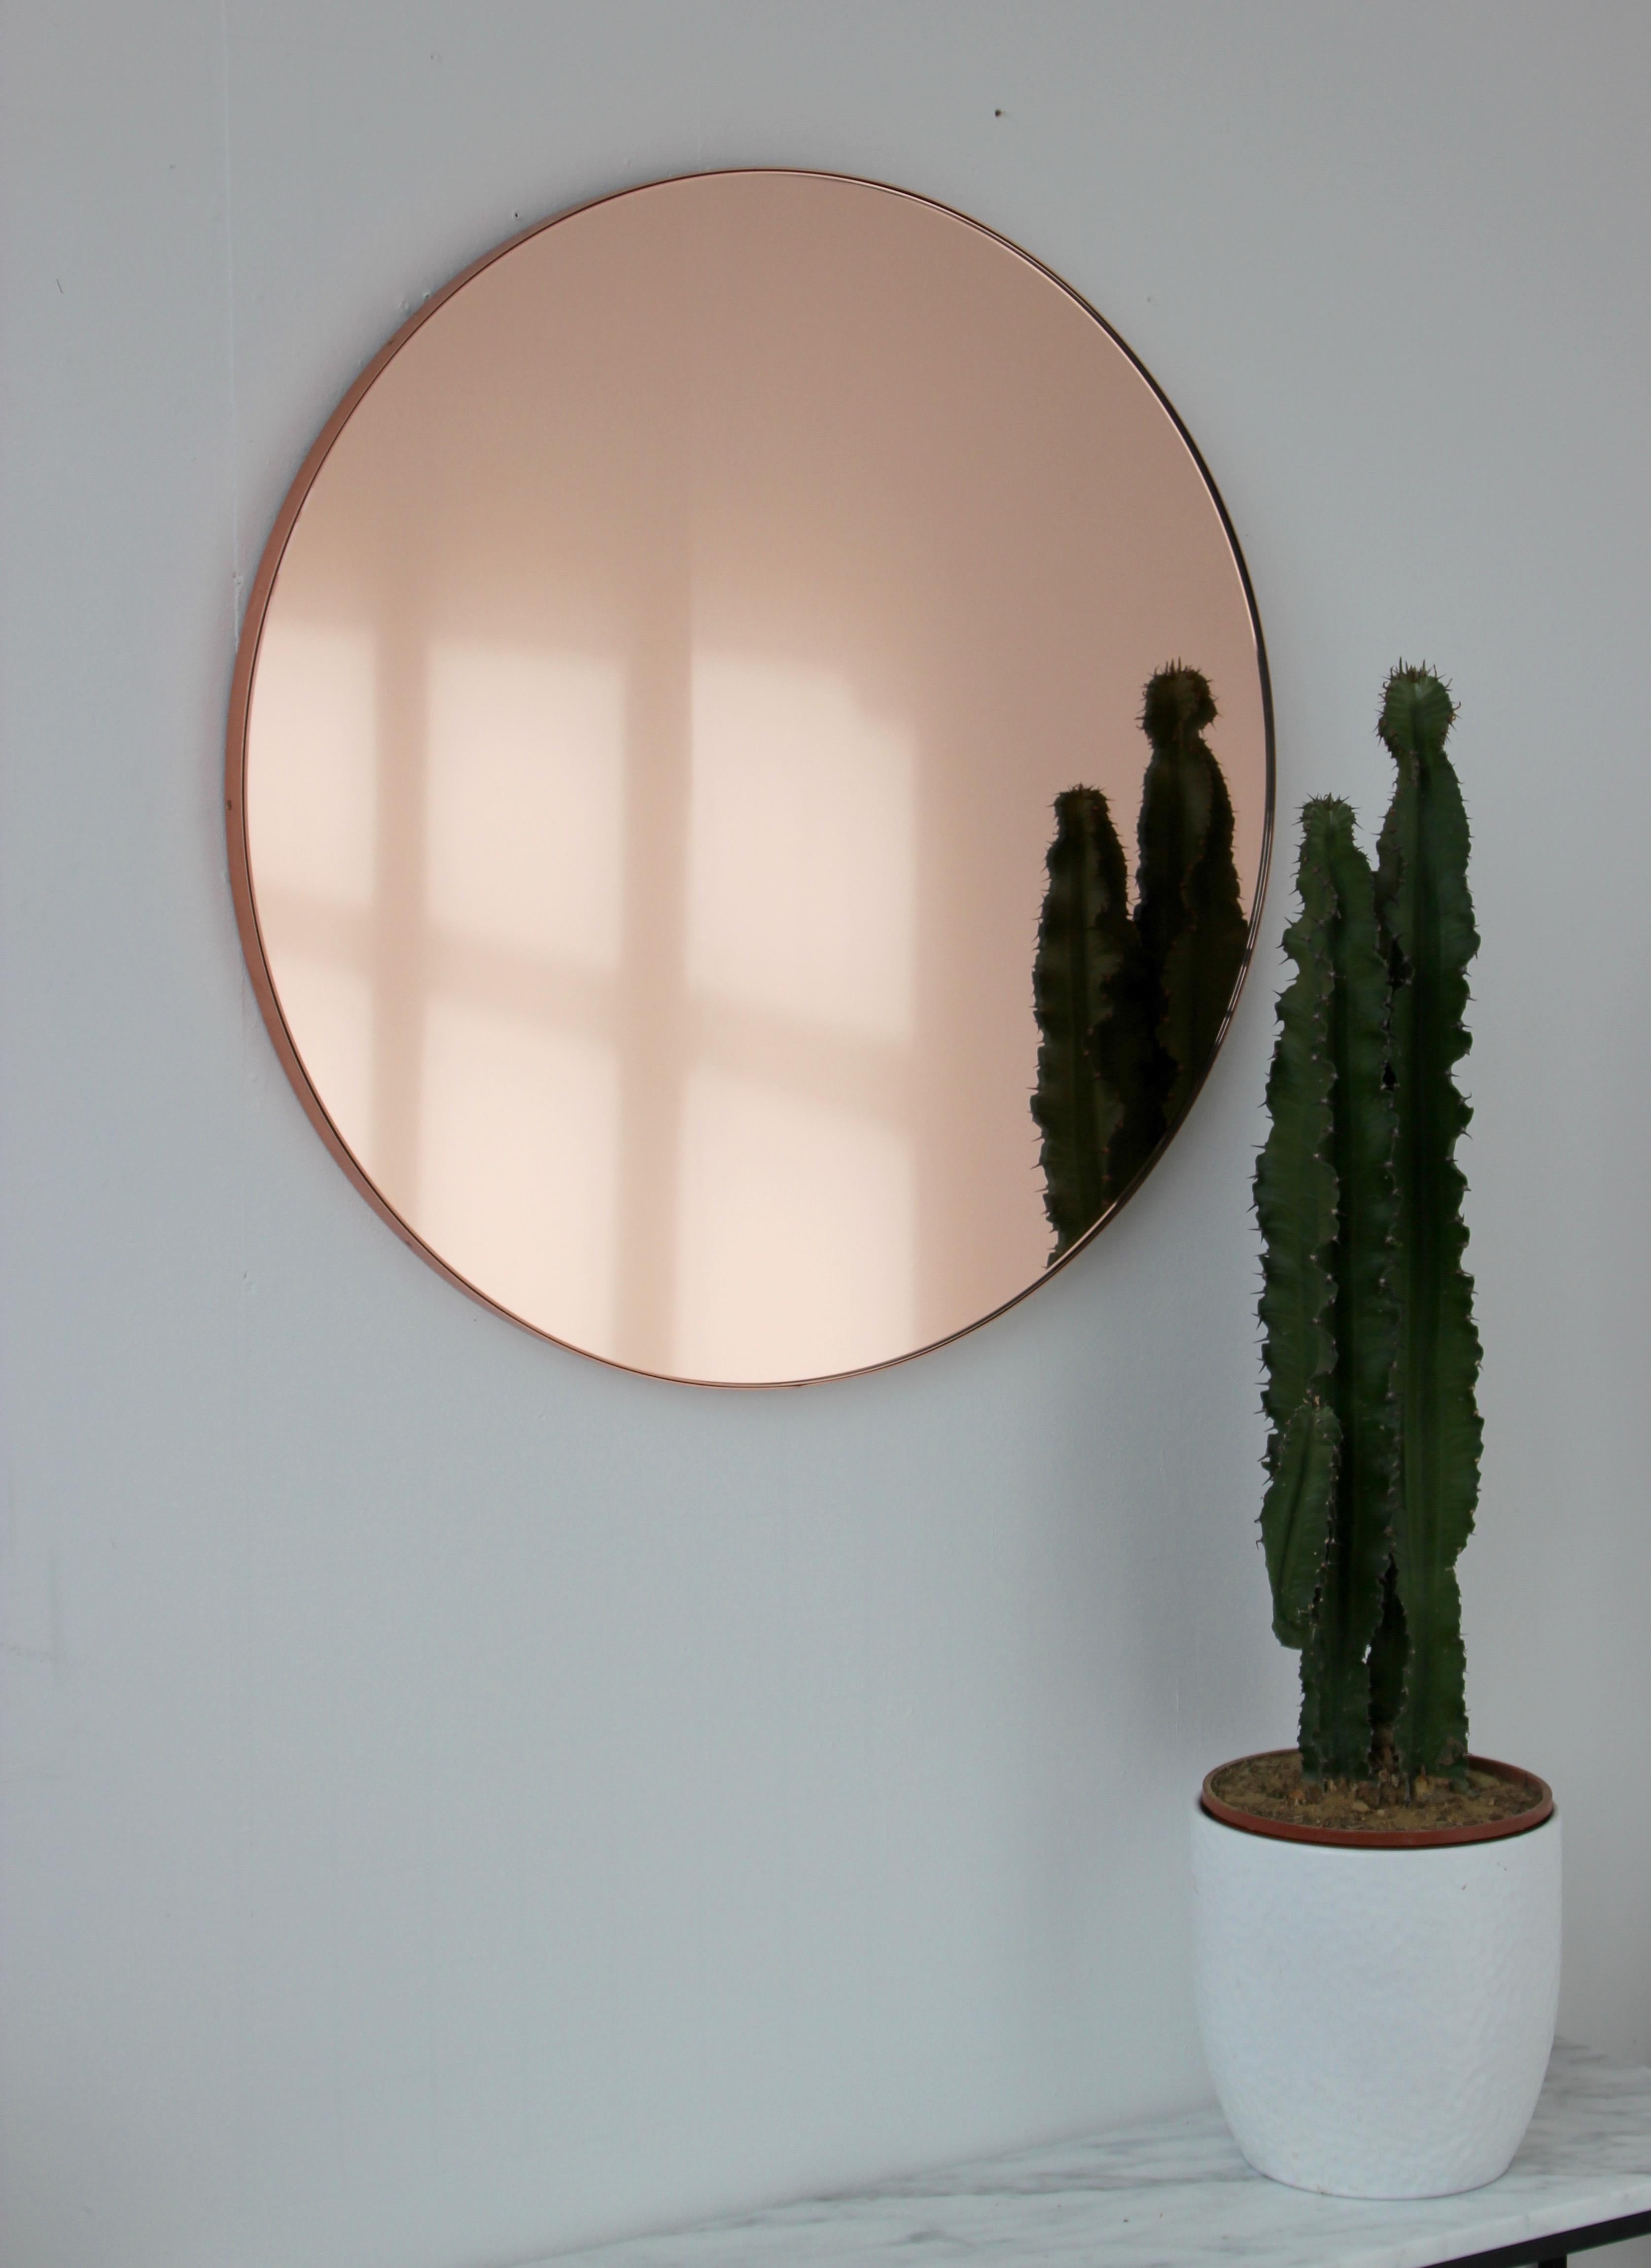 Contemporary Peach / Rose Gold tinted round mirror with a brushed copper frame. The detailing and finish, including visible copper plated screws, emphasise the craft and quality feel of the mirror. Designed and handcrafted in London, UK.

Medium,